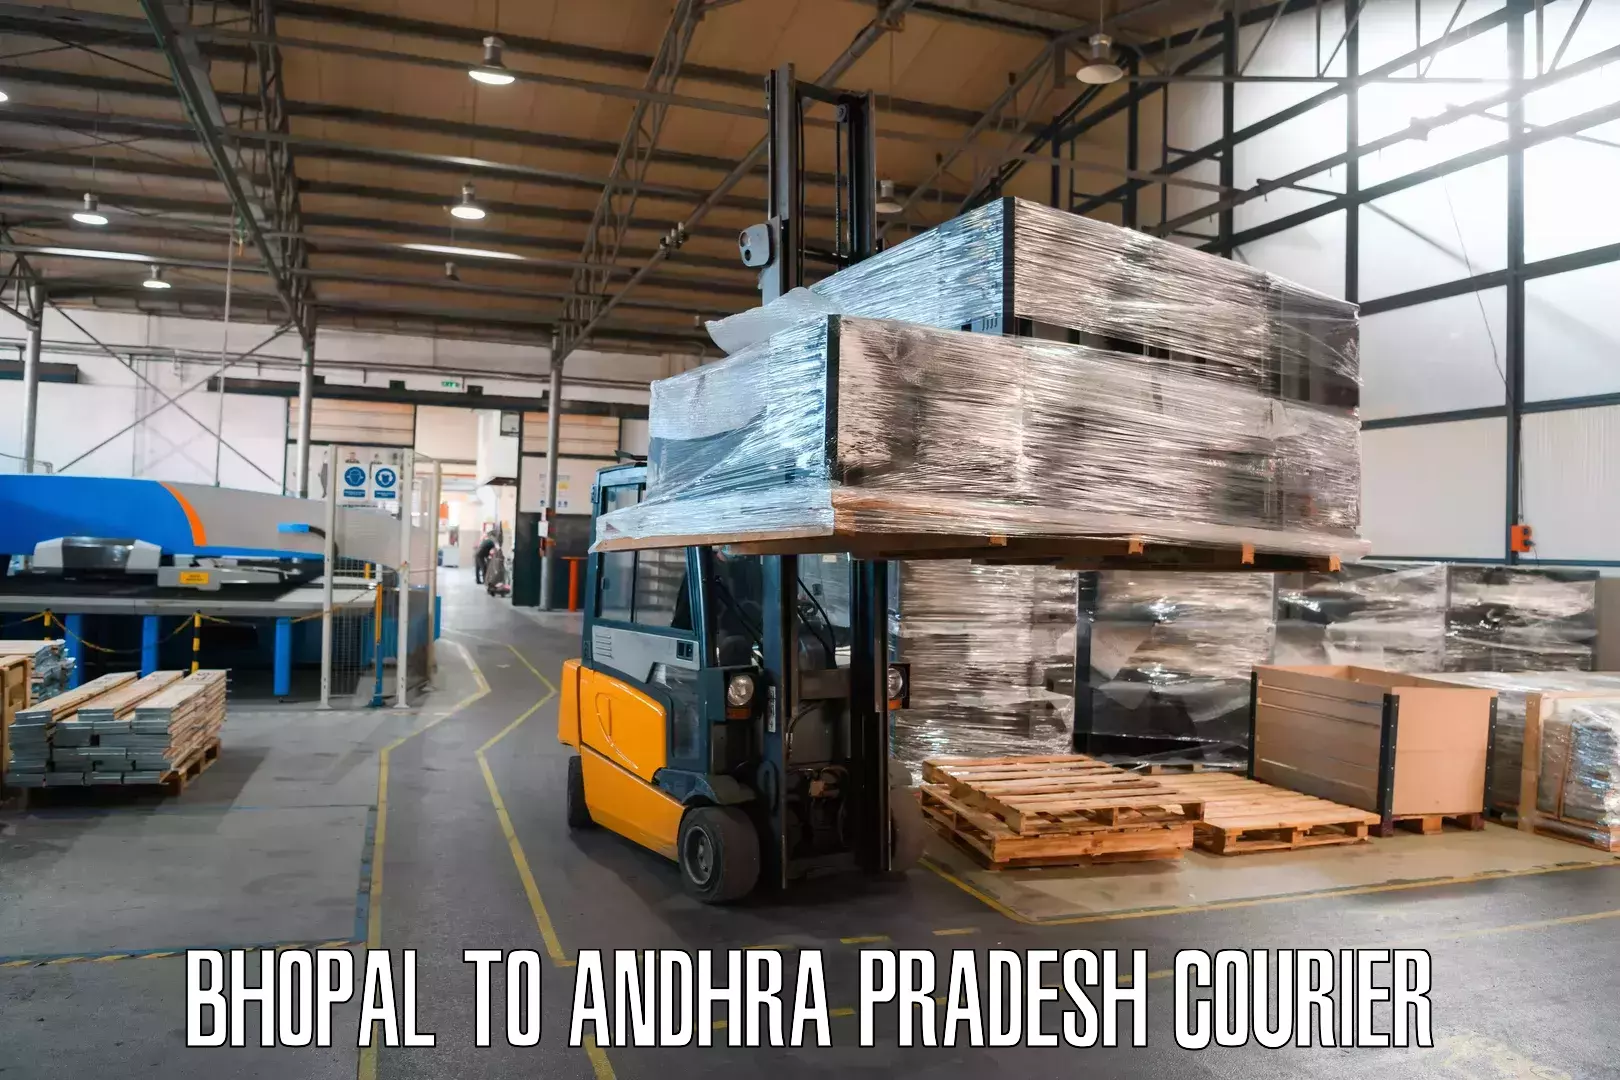 Courier service innovation Bhopal to Nellore